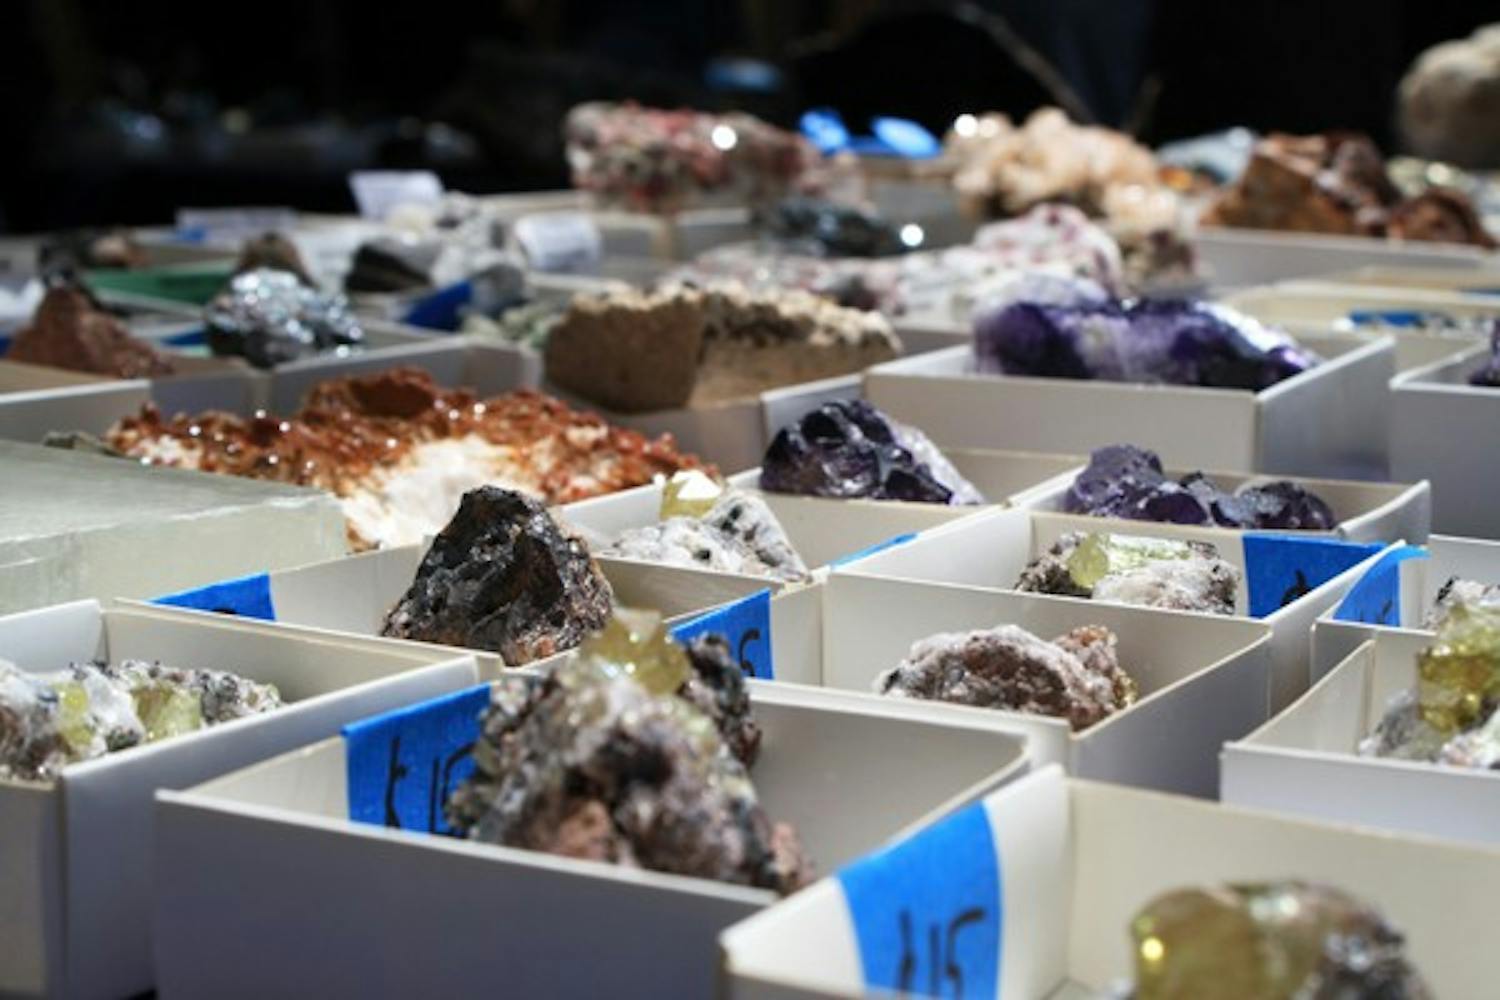 ASU’s Planetary Geology Group sold an assortment of rocks, minerals and elements on the Tempe campus to raise money for the club on Wednesday afternoon. (Photo by Jessie Wardarski)